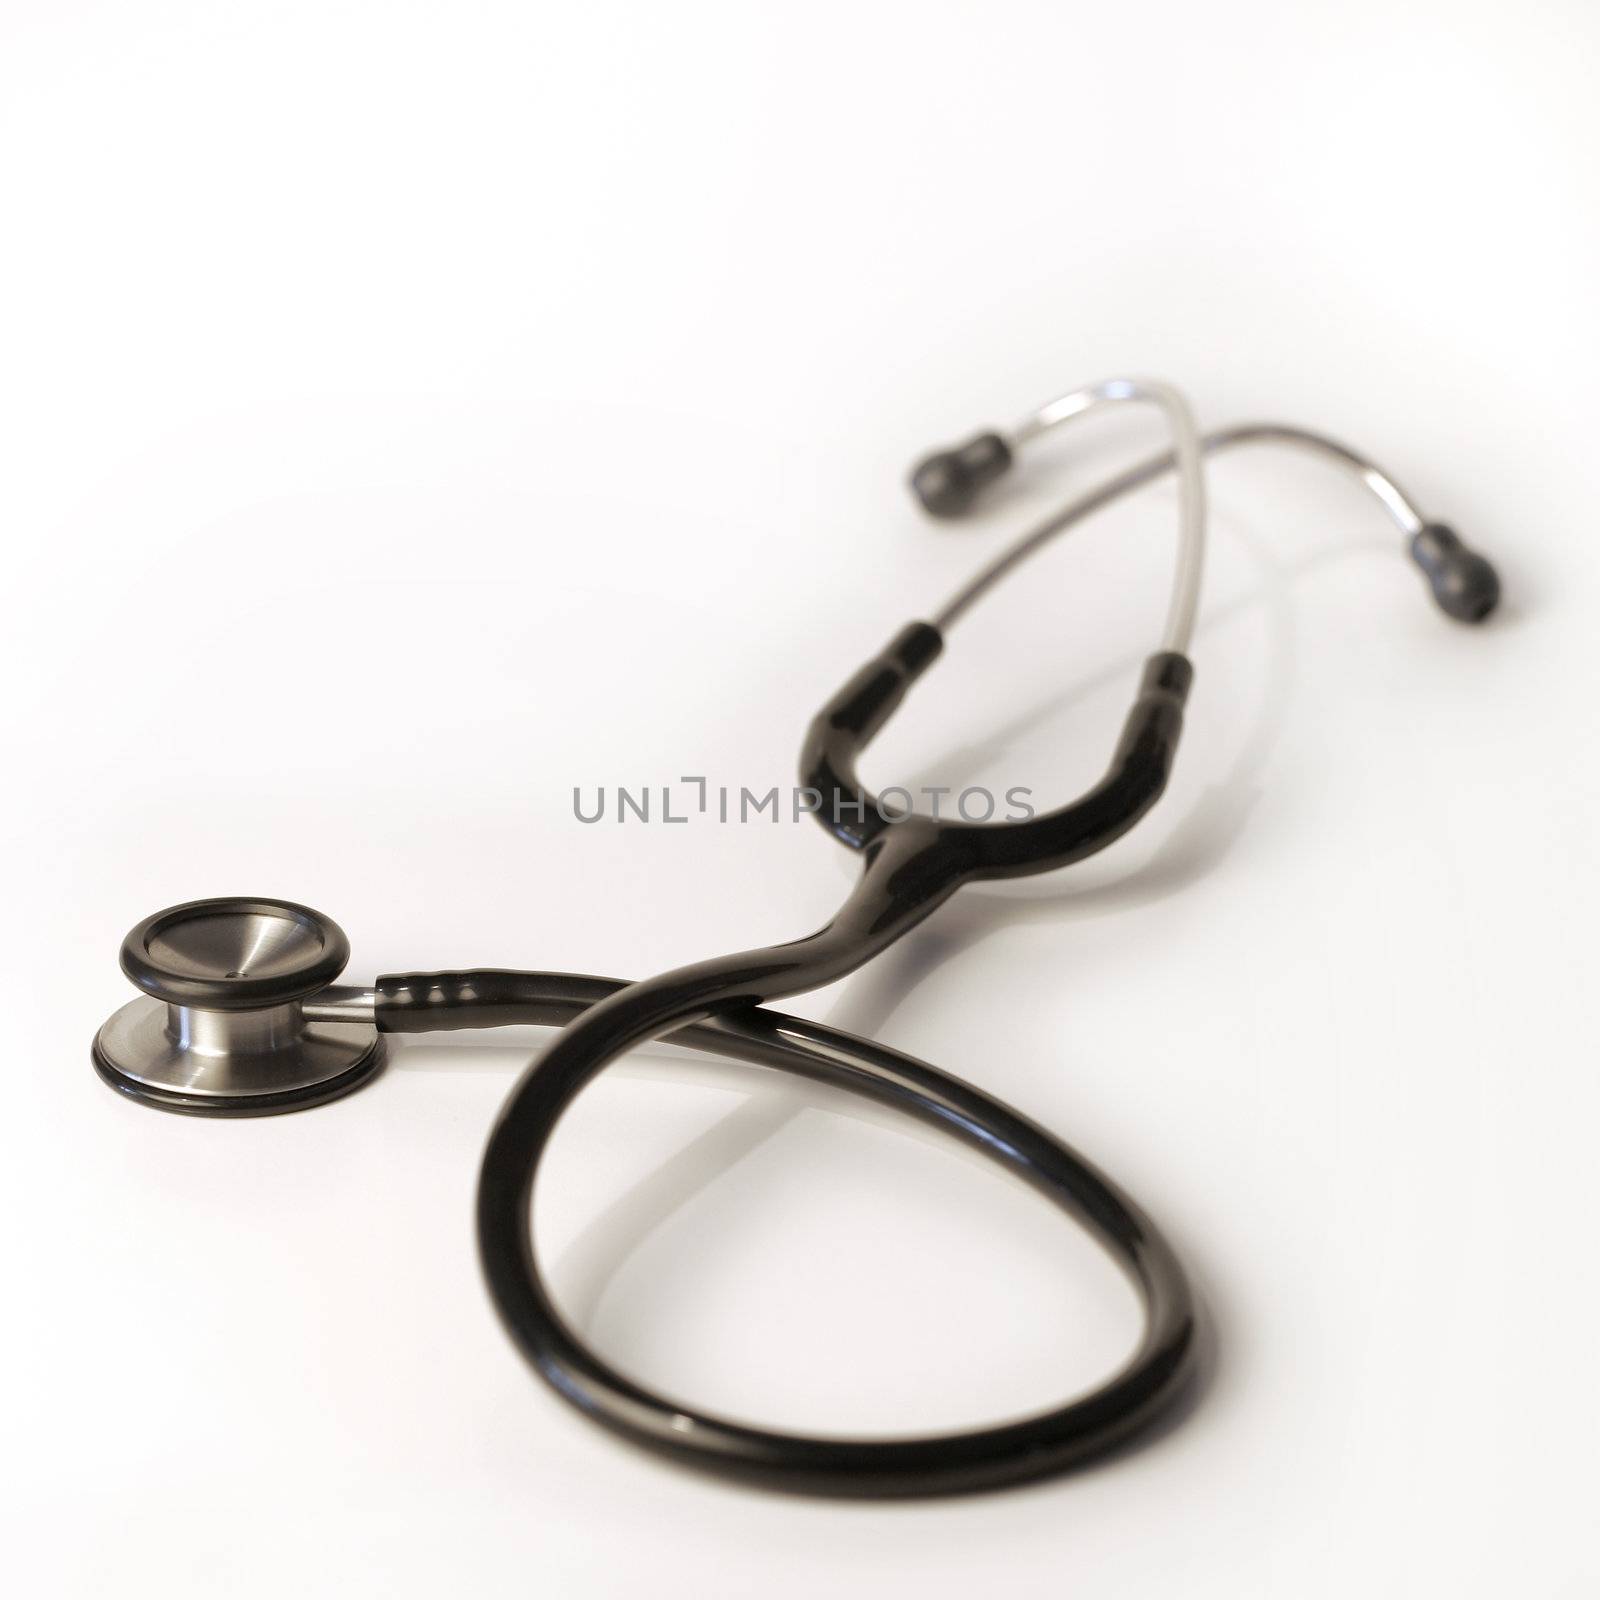 A shallow depth-of-field image of a stethoscope on white background.
